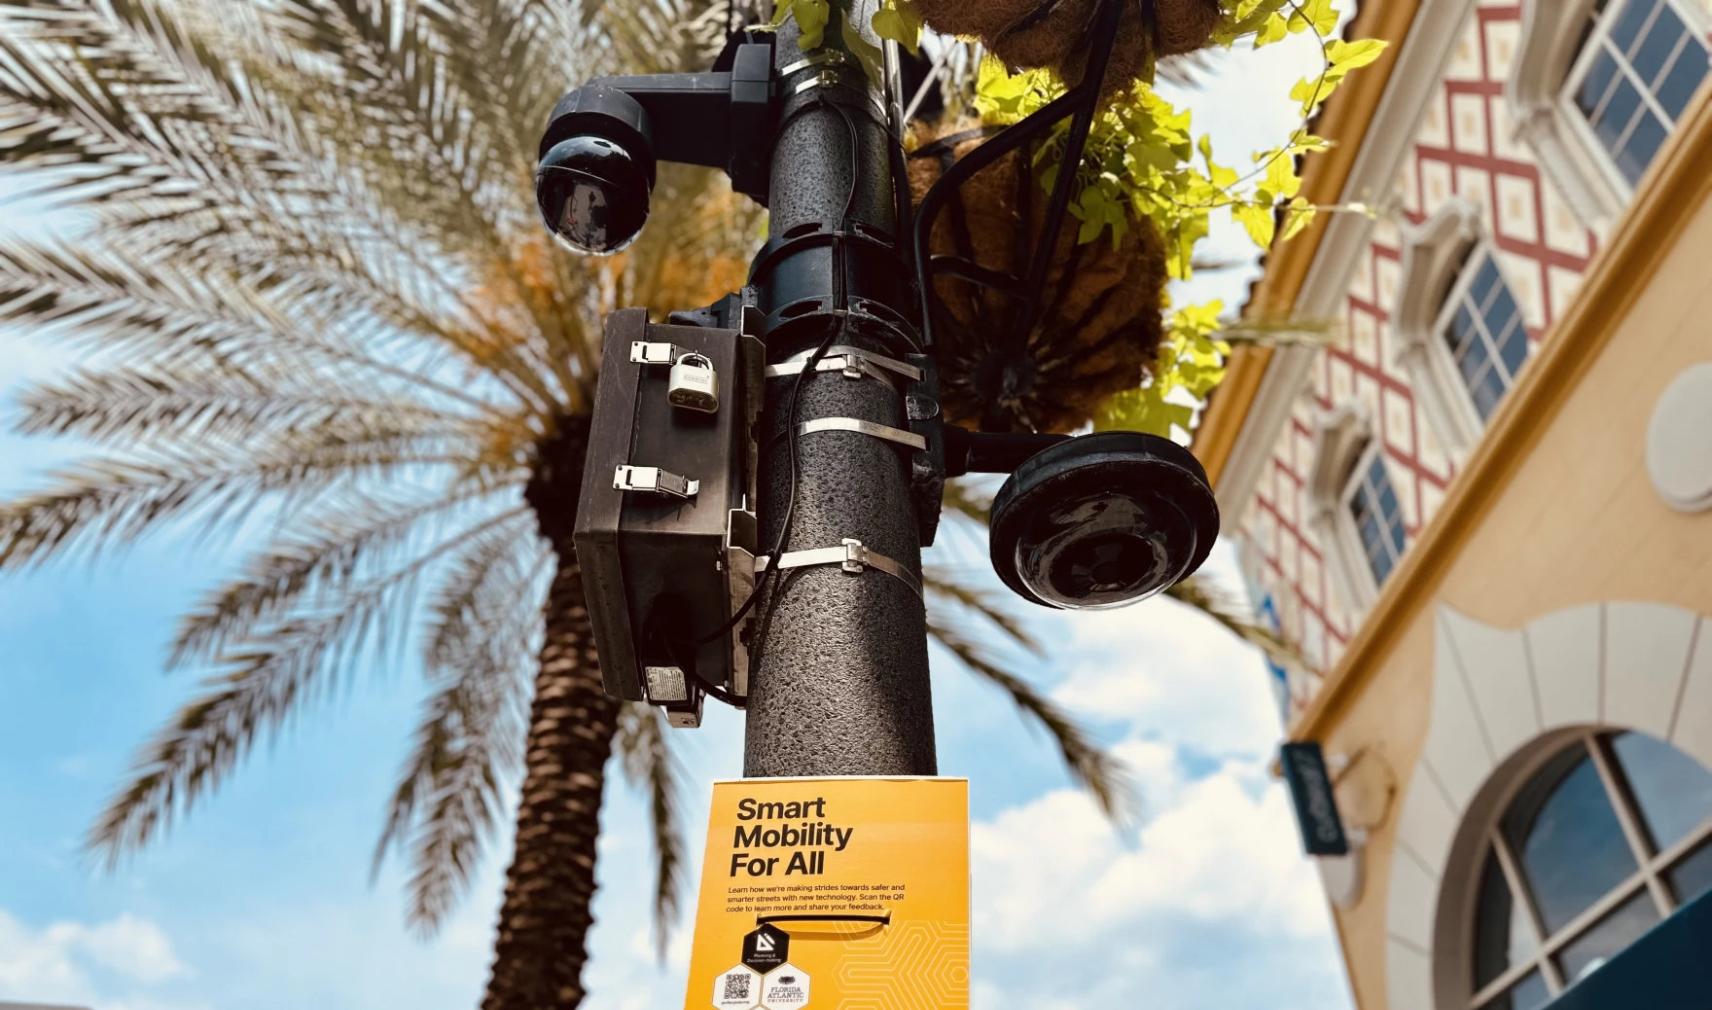 Sensors have been collecting movement data on the streets of West Palm Beach, FL for years, but the next stage of the plan to introduce AI-powered cameras with face-recognition software is being met with concern